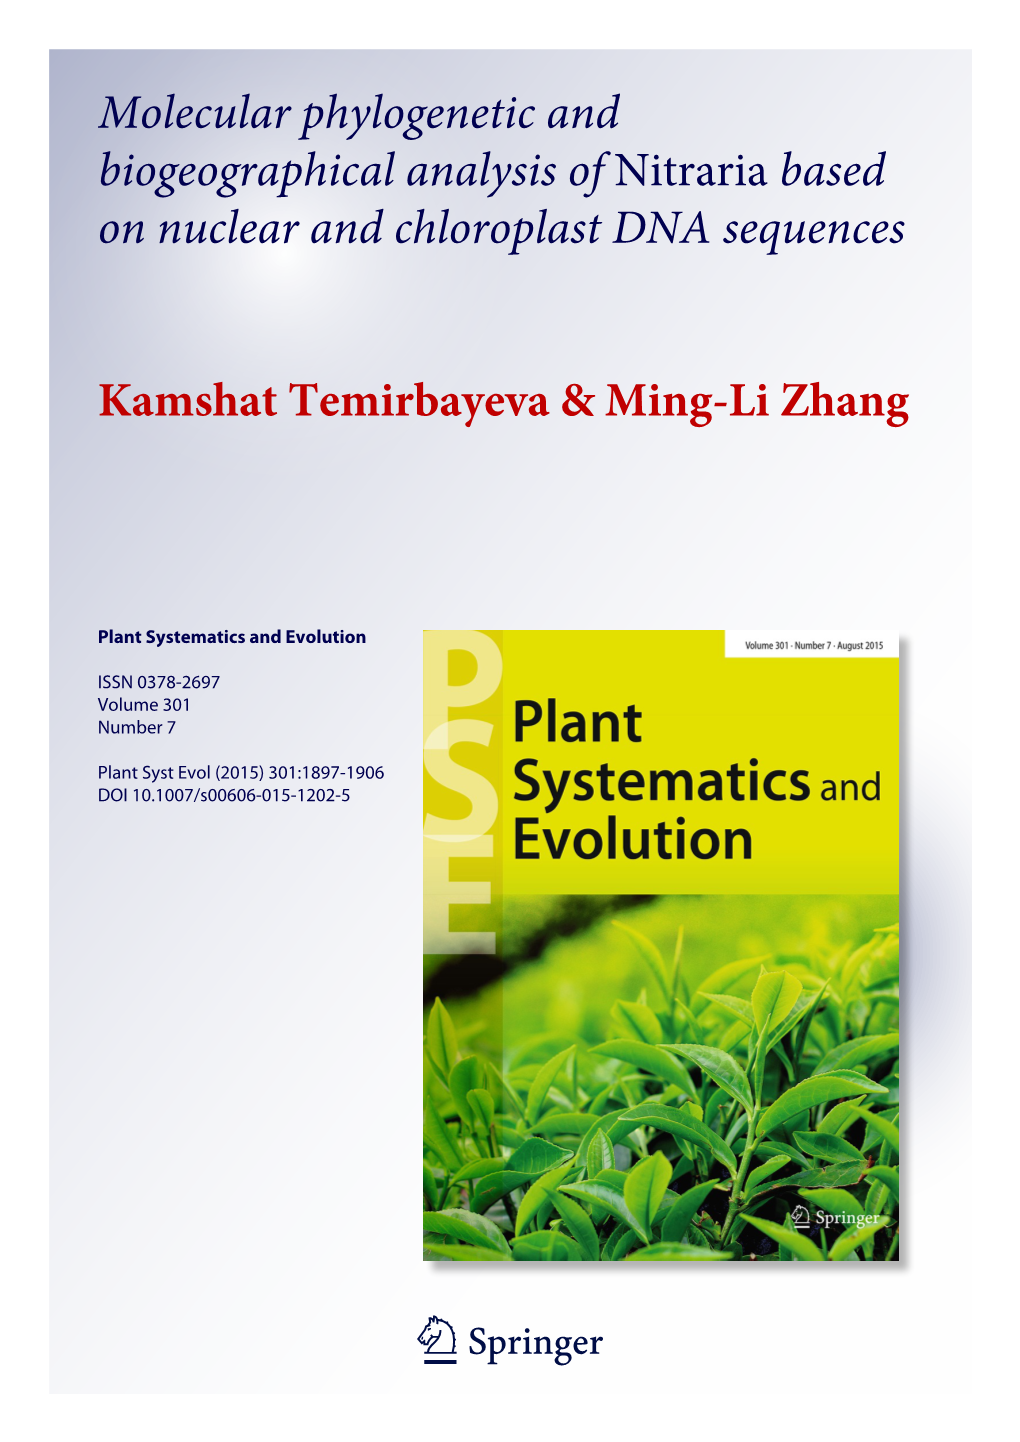 Molecular Phylogenetic and Biogeographical Analysis of Nitraria Based on Nuclear and Chloroplast DNA Sequences